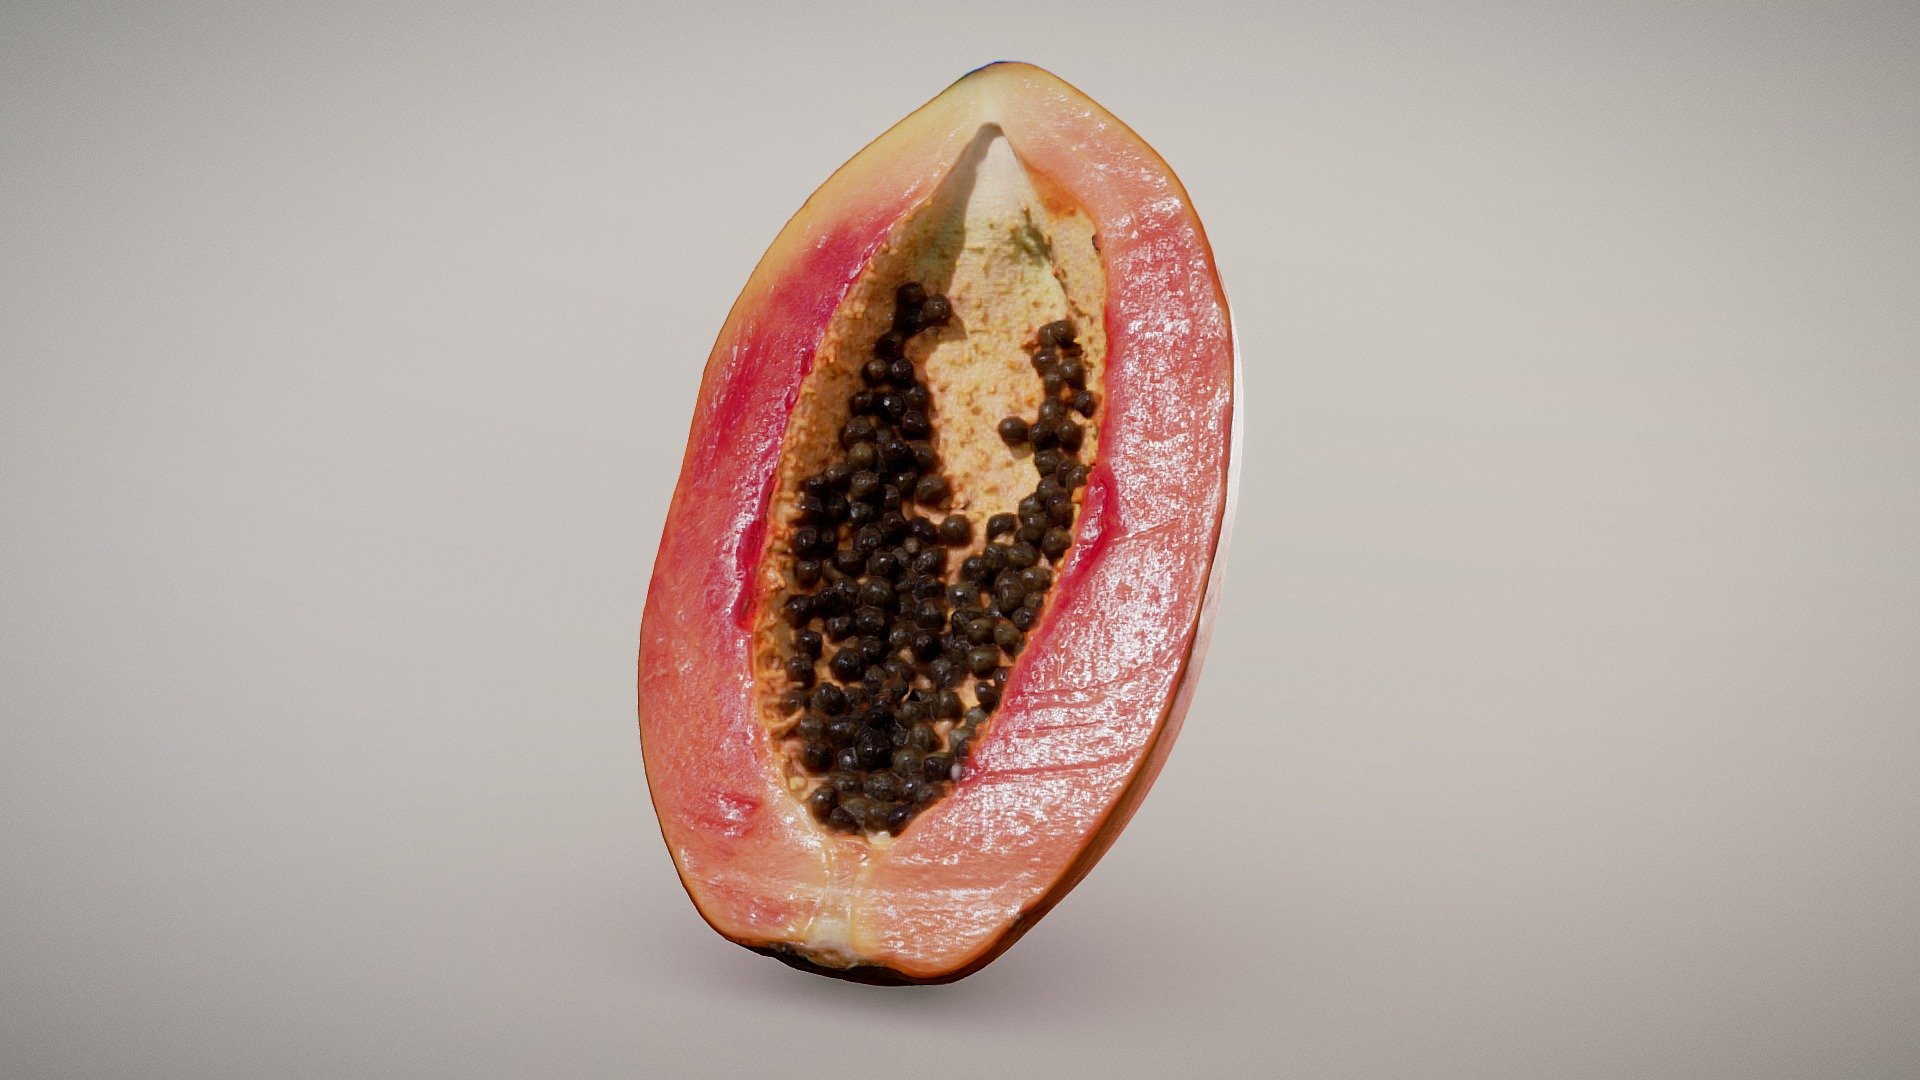 ** Mexican Papaya with Seeds **

Freshly cut in half Mexican Papaya covered in Dew

17.4 x 11.0 x 5.6 cm (66 micrometers per texel @ 4k)

Scanned using advanced technology developed by inciprocal Inc. that enables highly photo-realistic reproduction of real-world products in virtual environments. Our hardware and software technology combines advanced photometry, structured light, photogrammtery and light fields to capture and generate accurate material representations from tens of thousands of images targeting real-time and offline path-traced PBR compatible renderers.

Zip file includes low-poly OBJ mesh (in meters) with a set of 4k PBR textures compressed with lossless JPEG (no chroma sub-sampling) 3d model